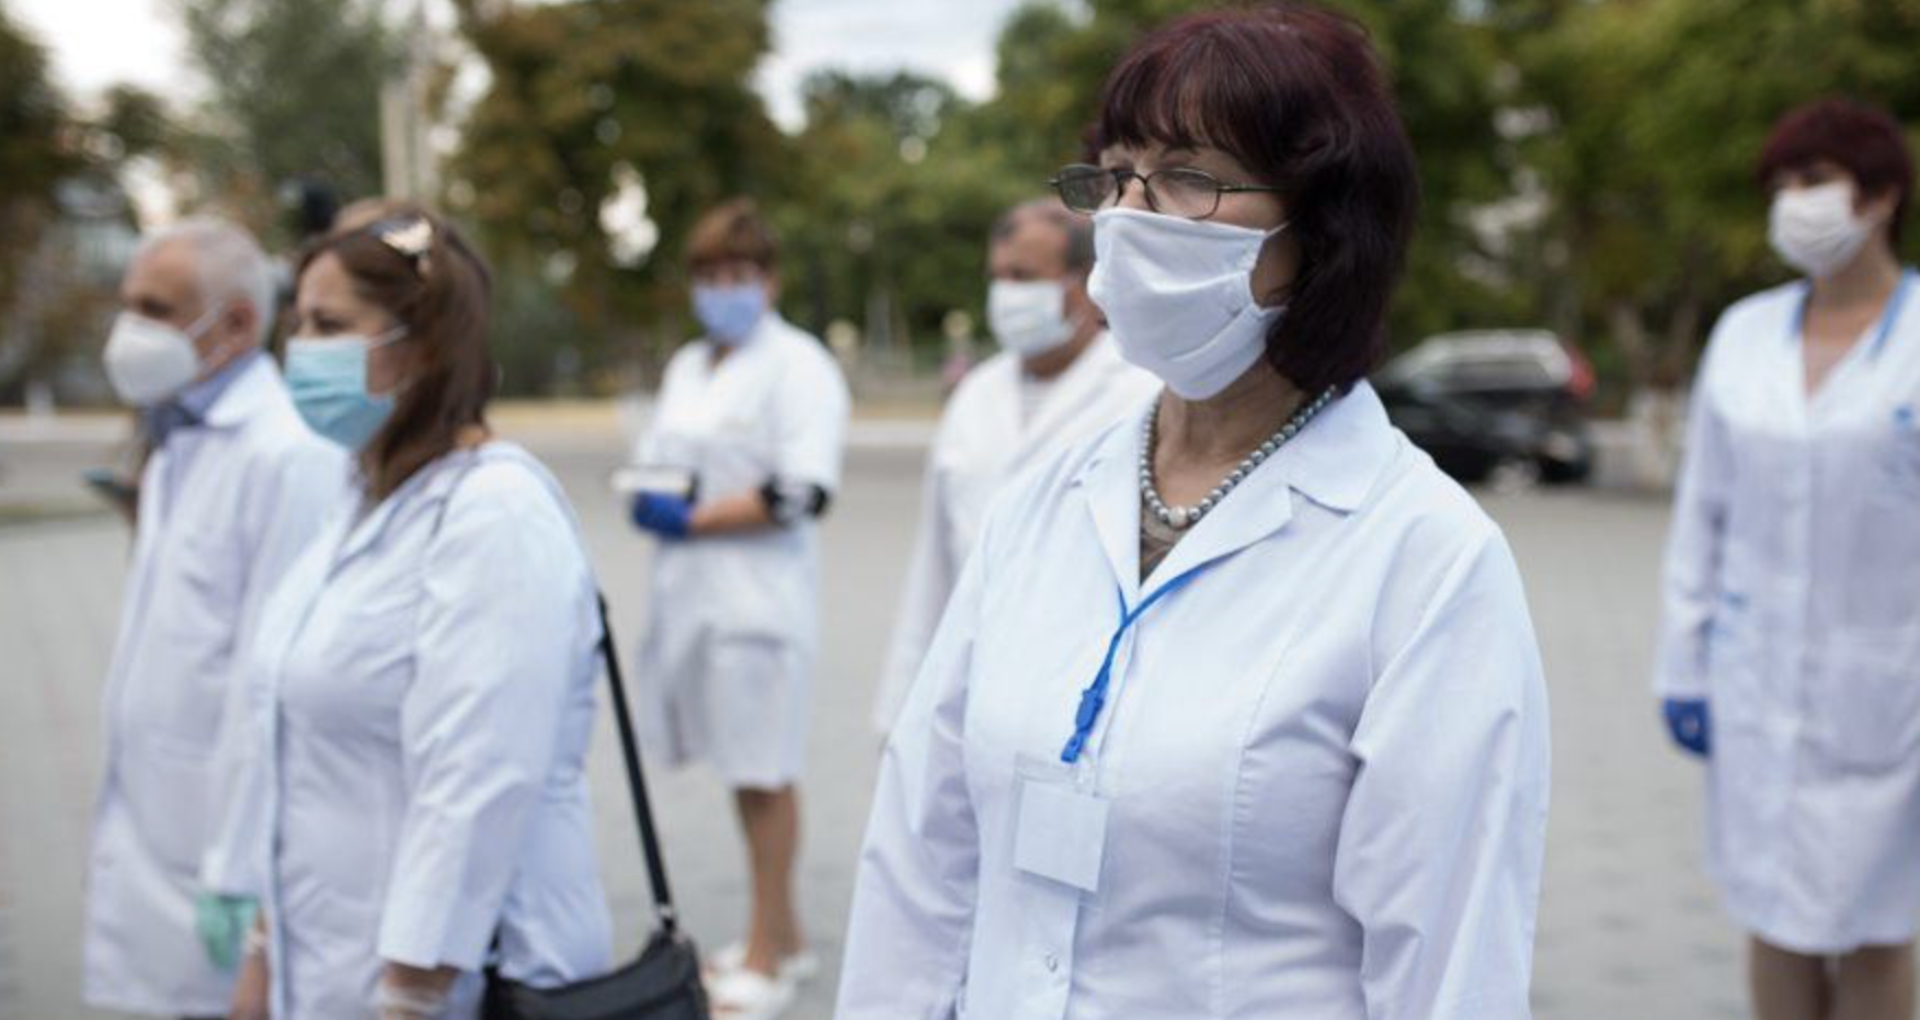 The EU and the WHO Donate Protective Equipment to the Doctors in the ATU Găgăuzia